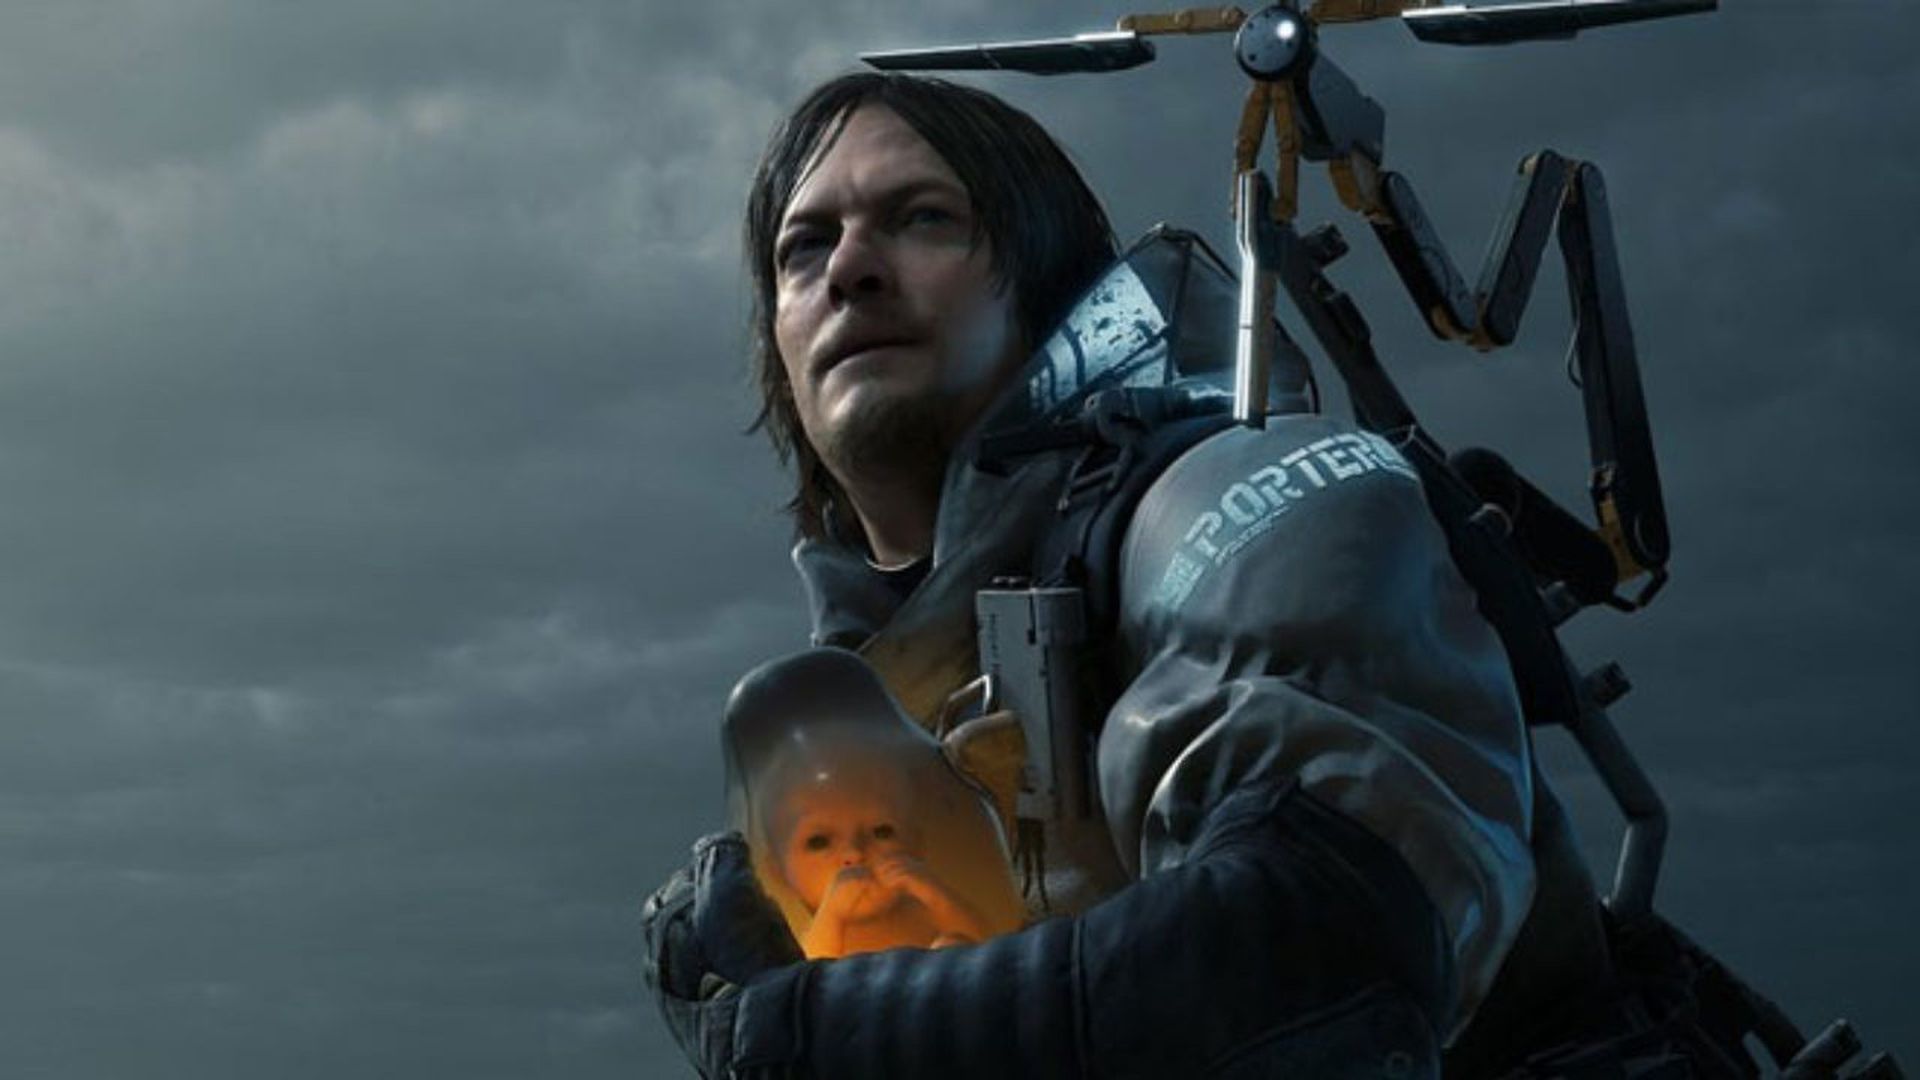 Death Stranding will be available on PC Game Pass on August 23rd